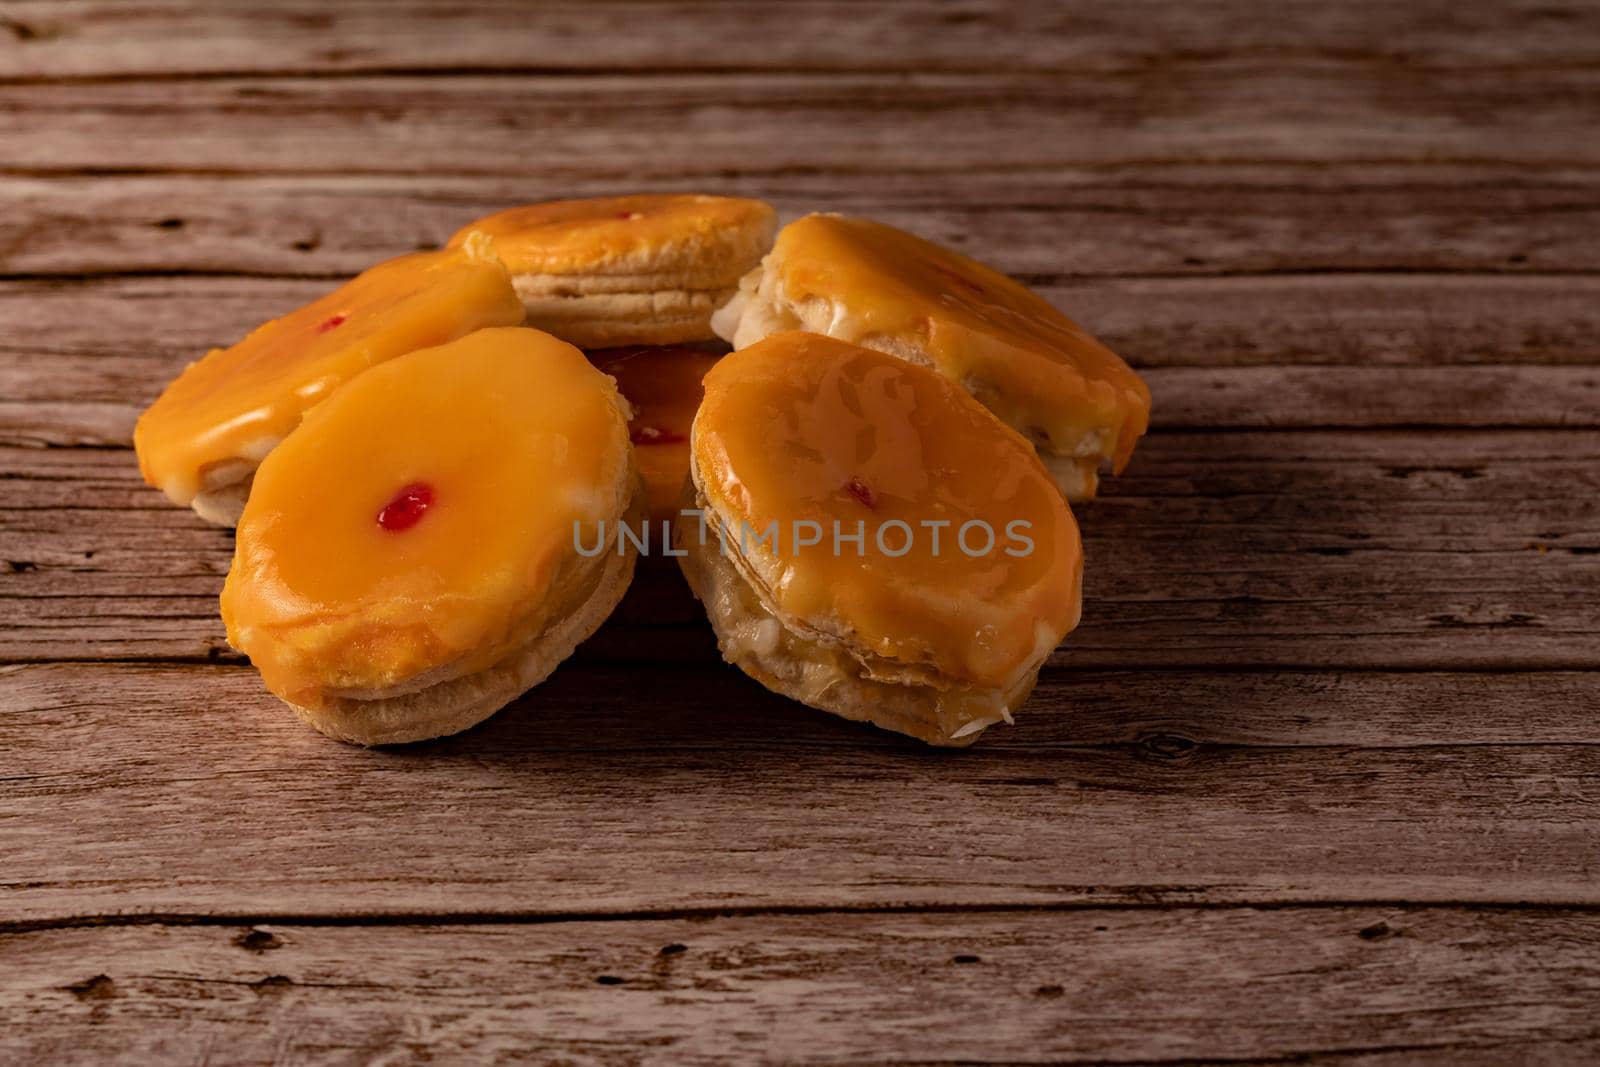 tortas locas or crazy cakes typical from andalucia, spain isolated on a wood background